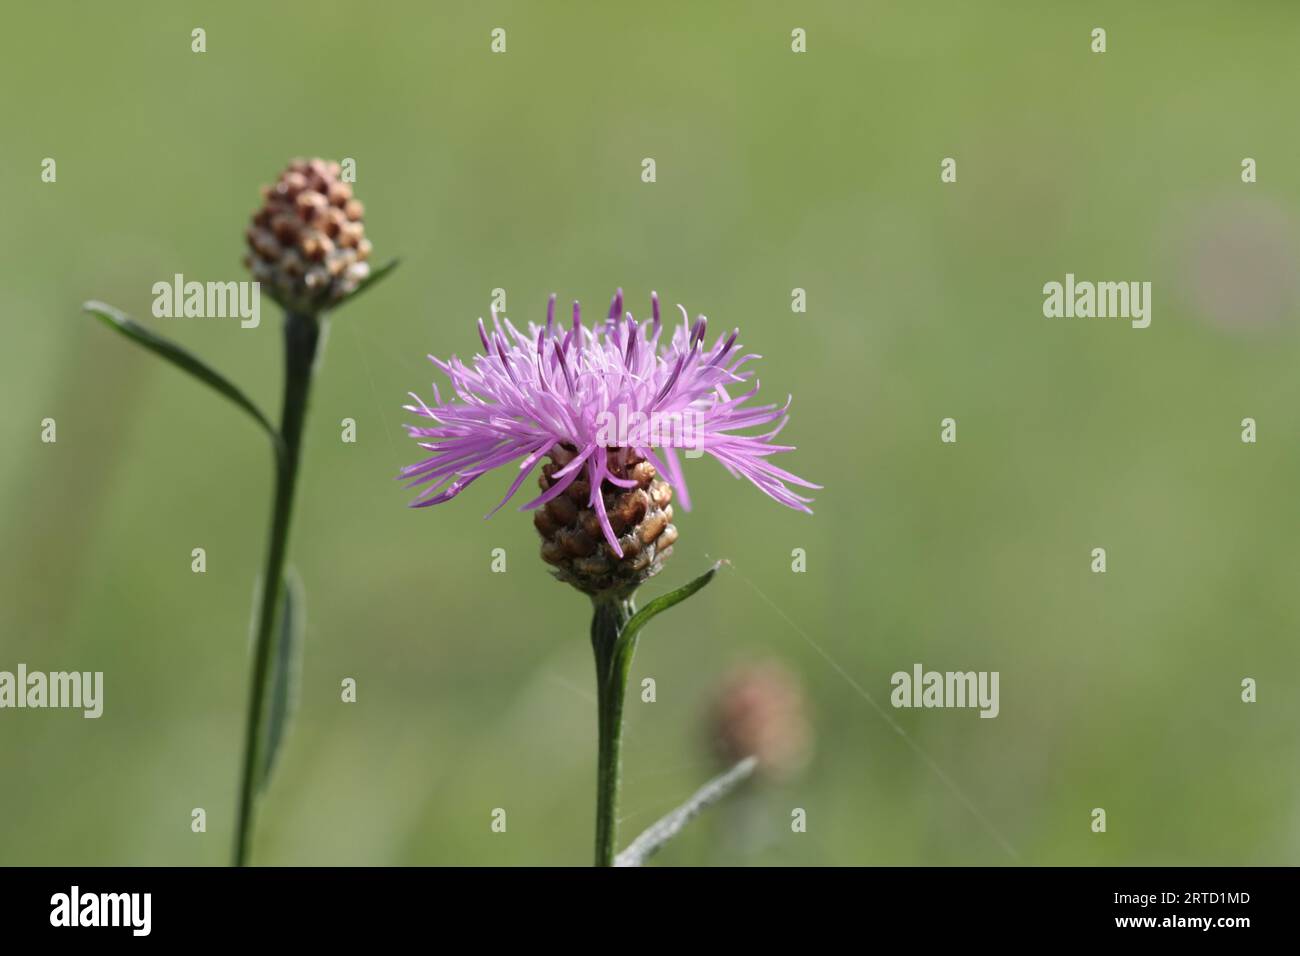 close-up of a blooming centaurea jacea flower and a centaurea jacea bud against a green blurry background, copy space Stock Photo